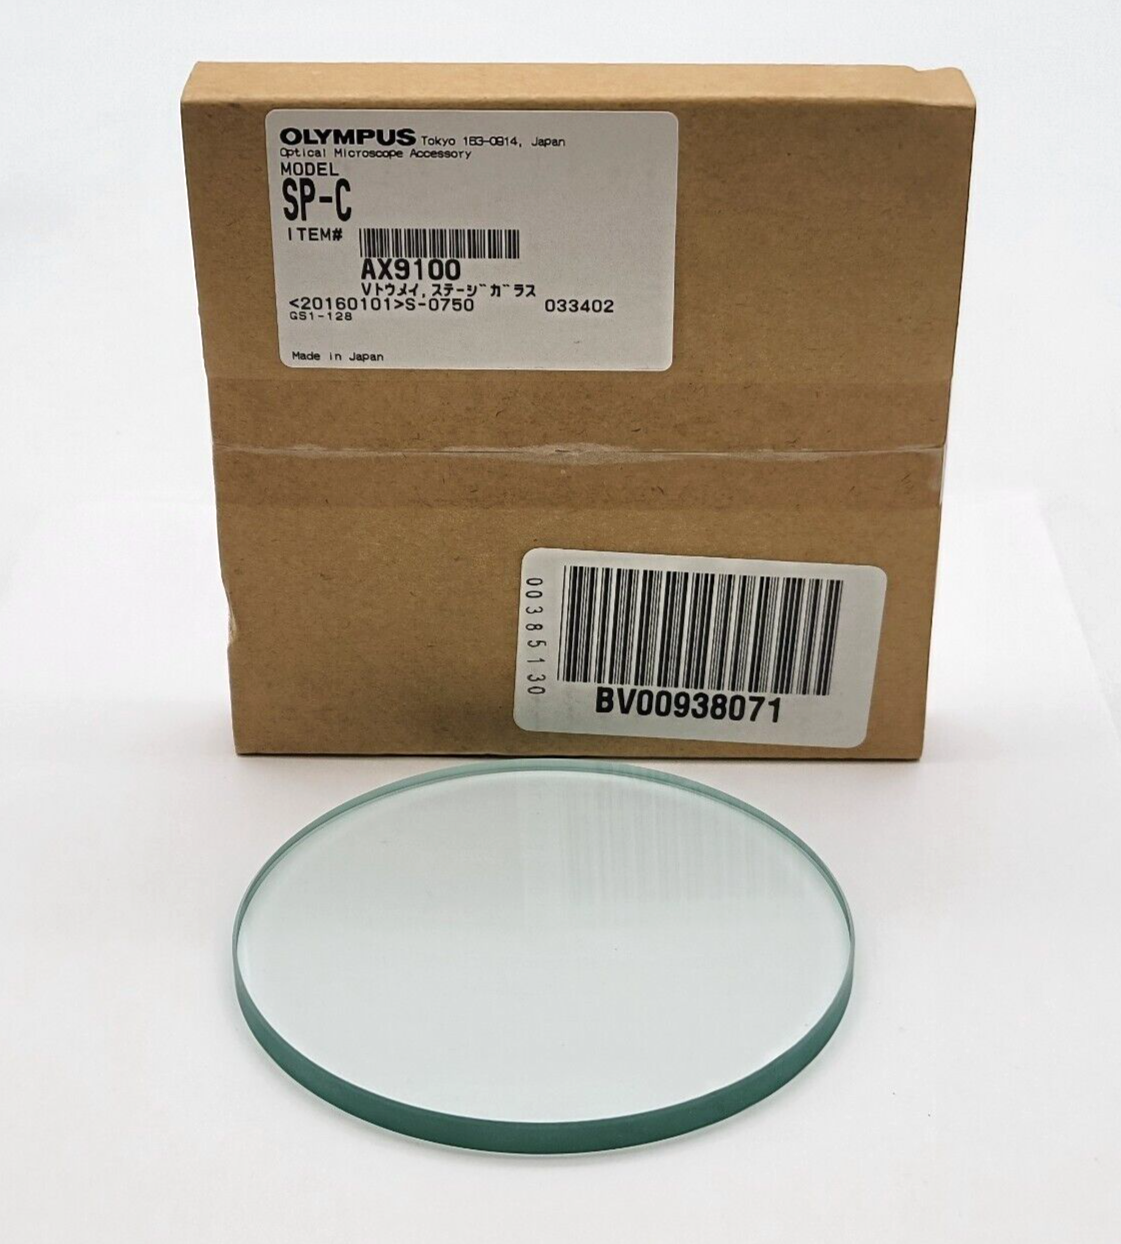 Olympus Stereo Microscope SP-C Clear Glass Stage Plate for Olympus SZX-ILLK - microscopemarketplace